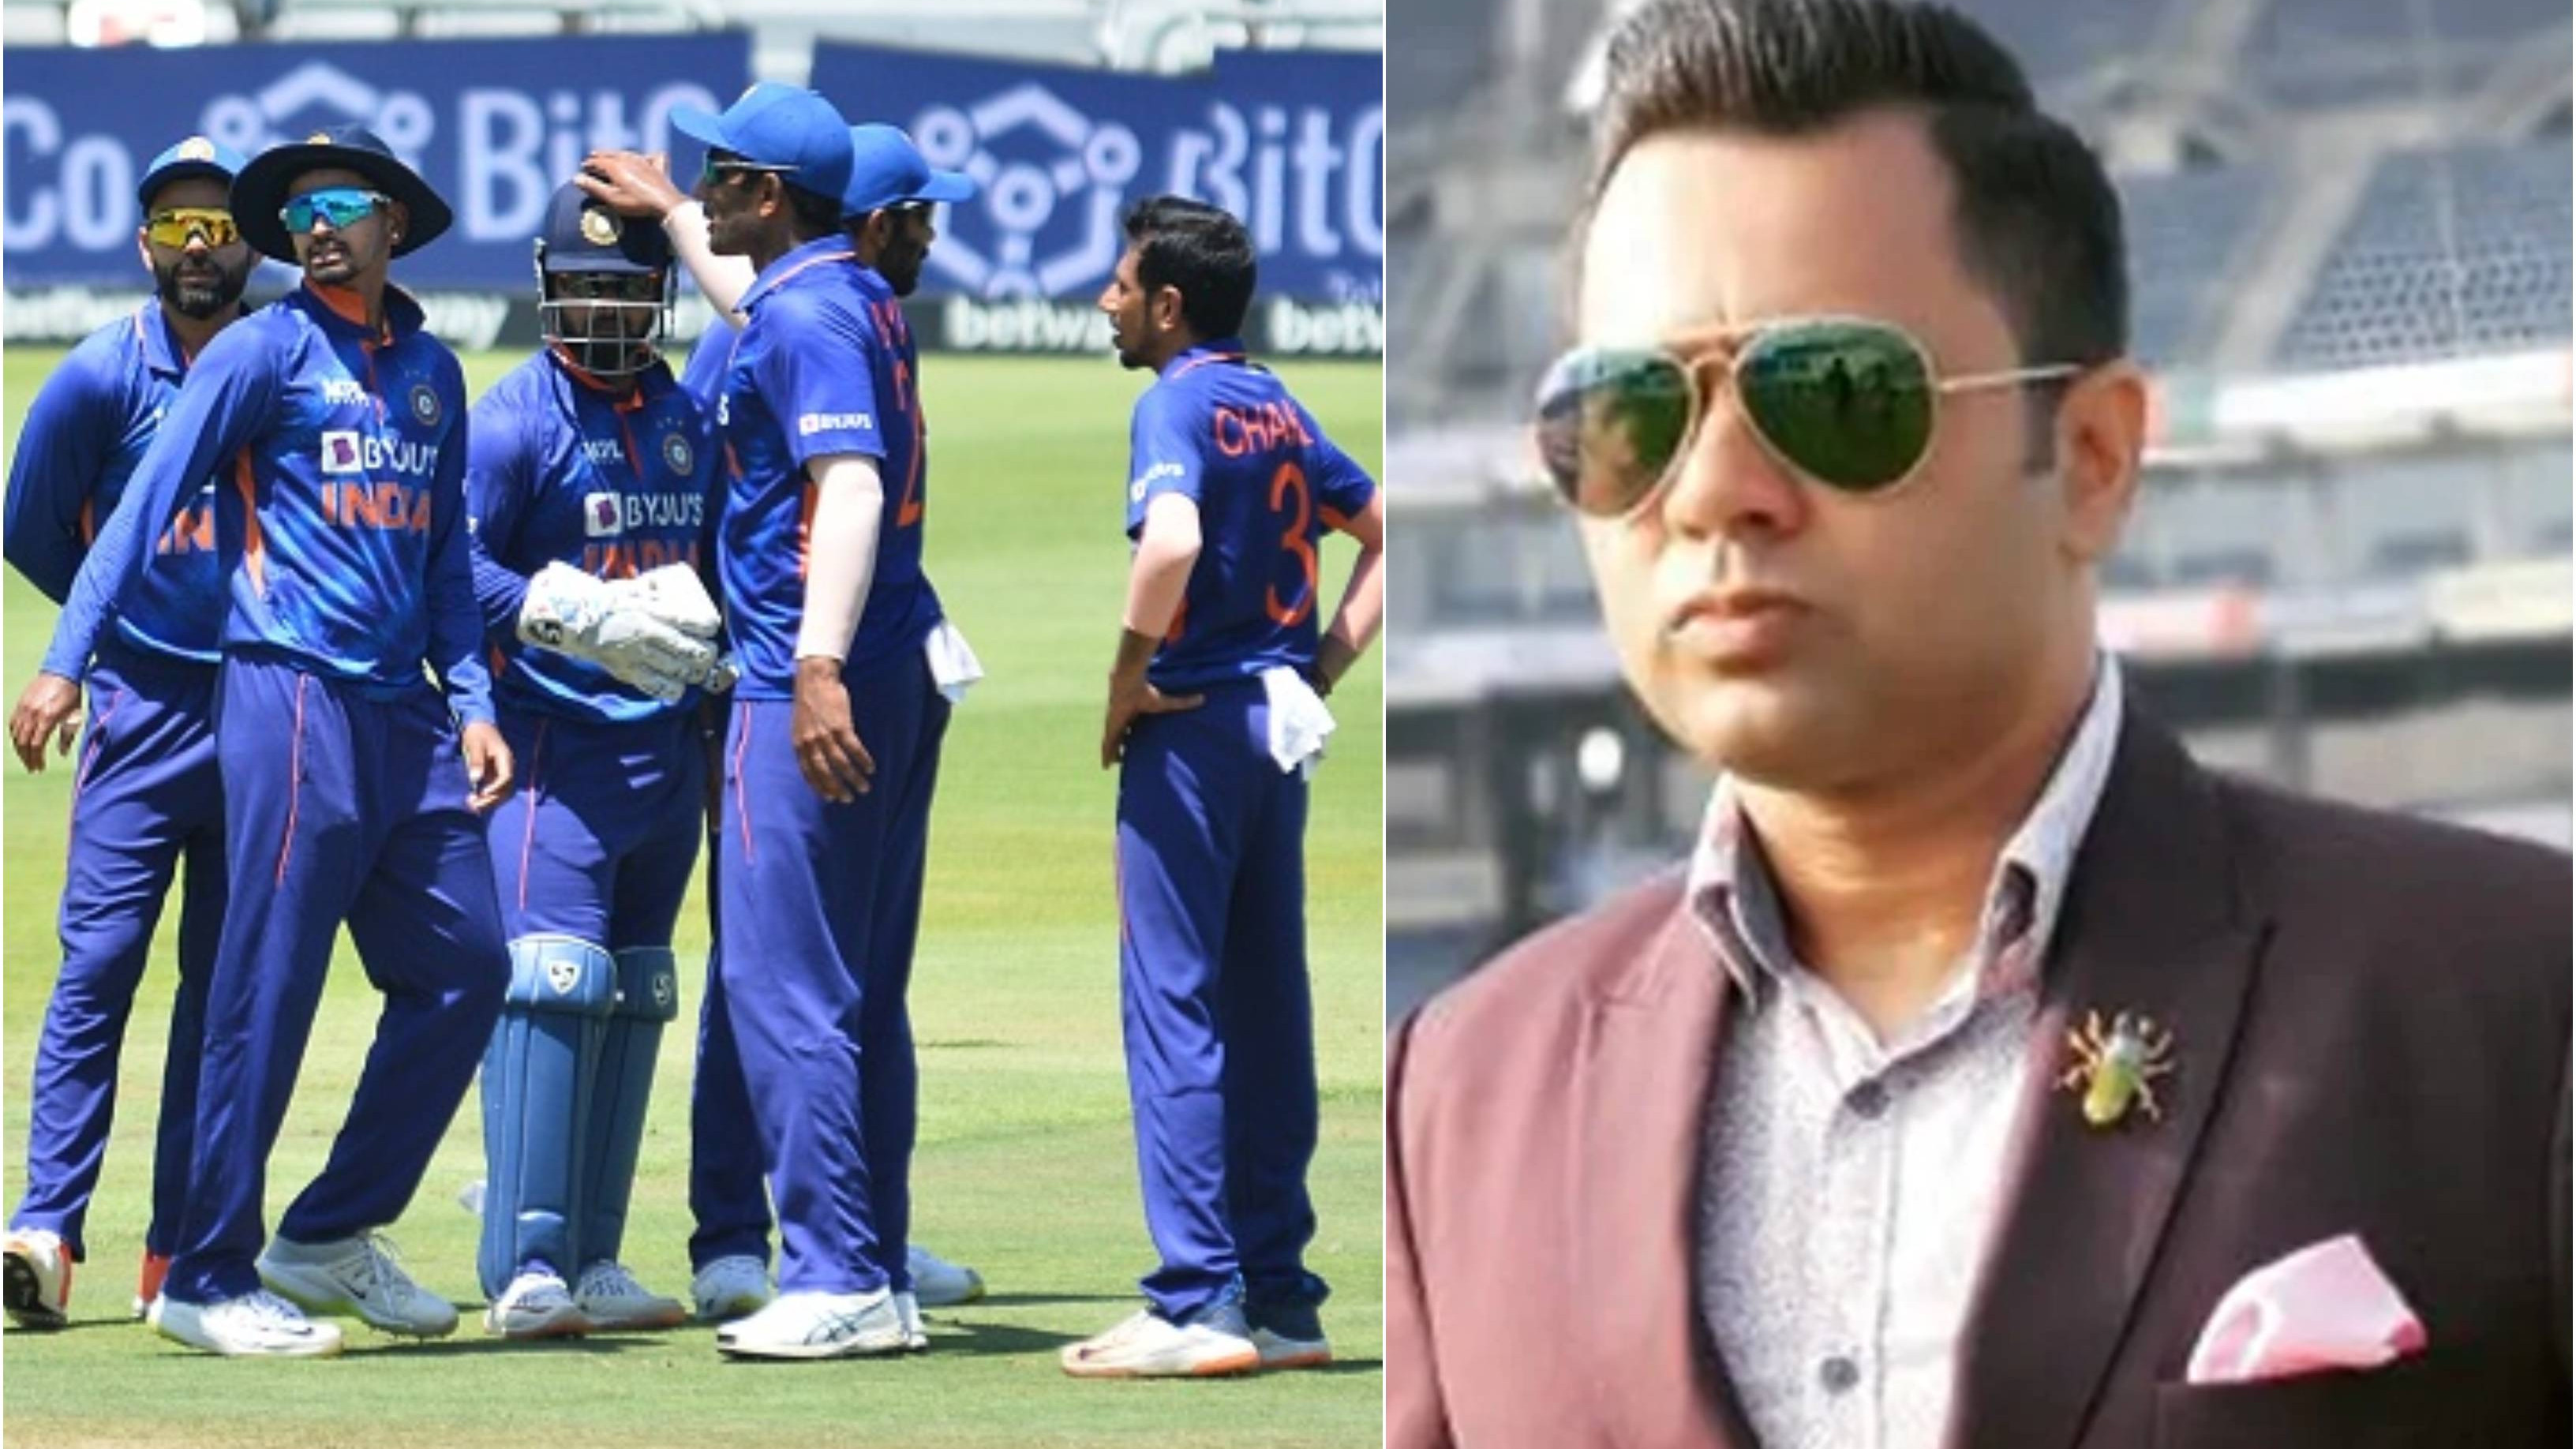 “In the long term, it will be…”: Aakash Chopra picks two names for India’s ODI captaincy after Rohit Sharma’s tenure